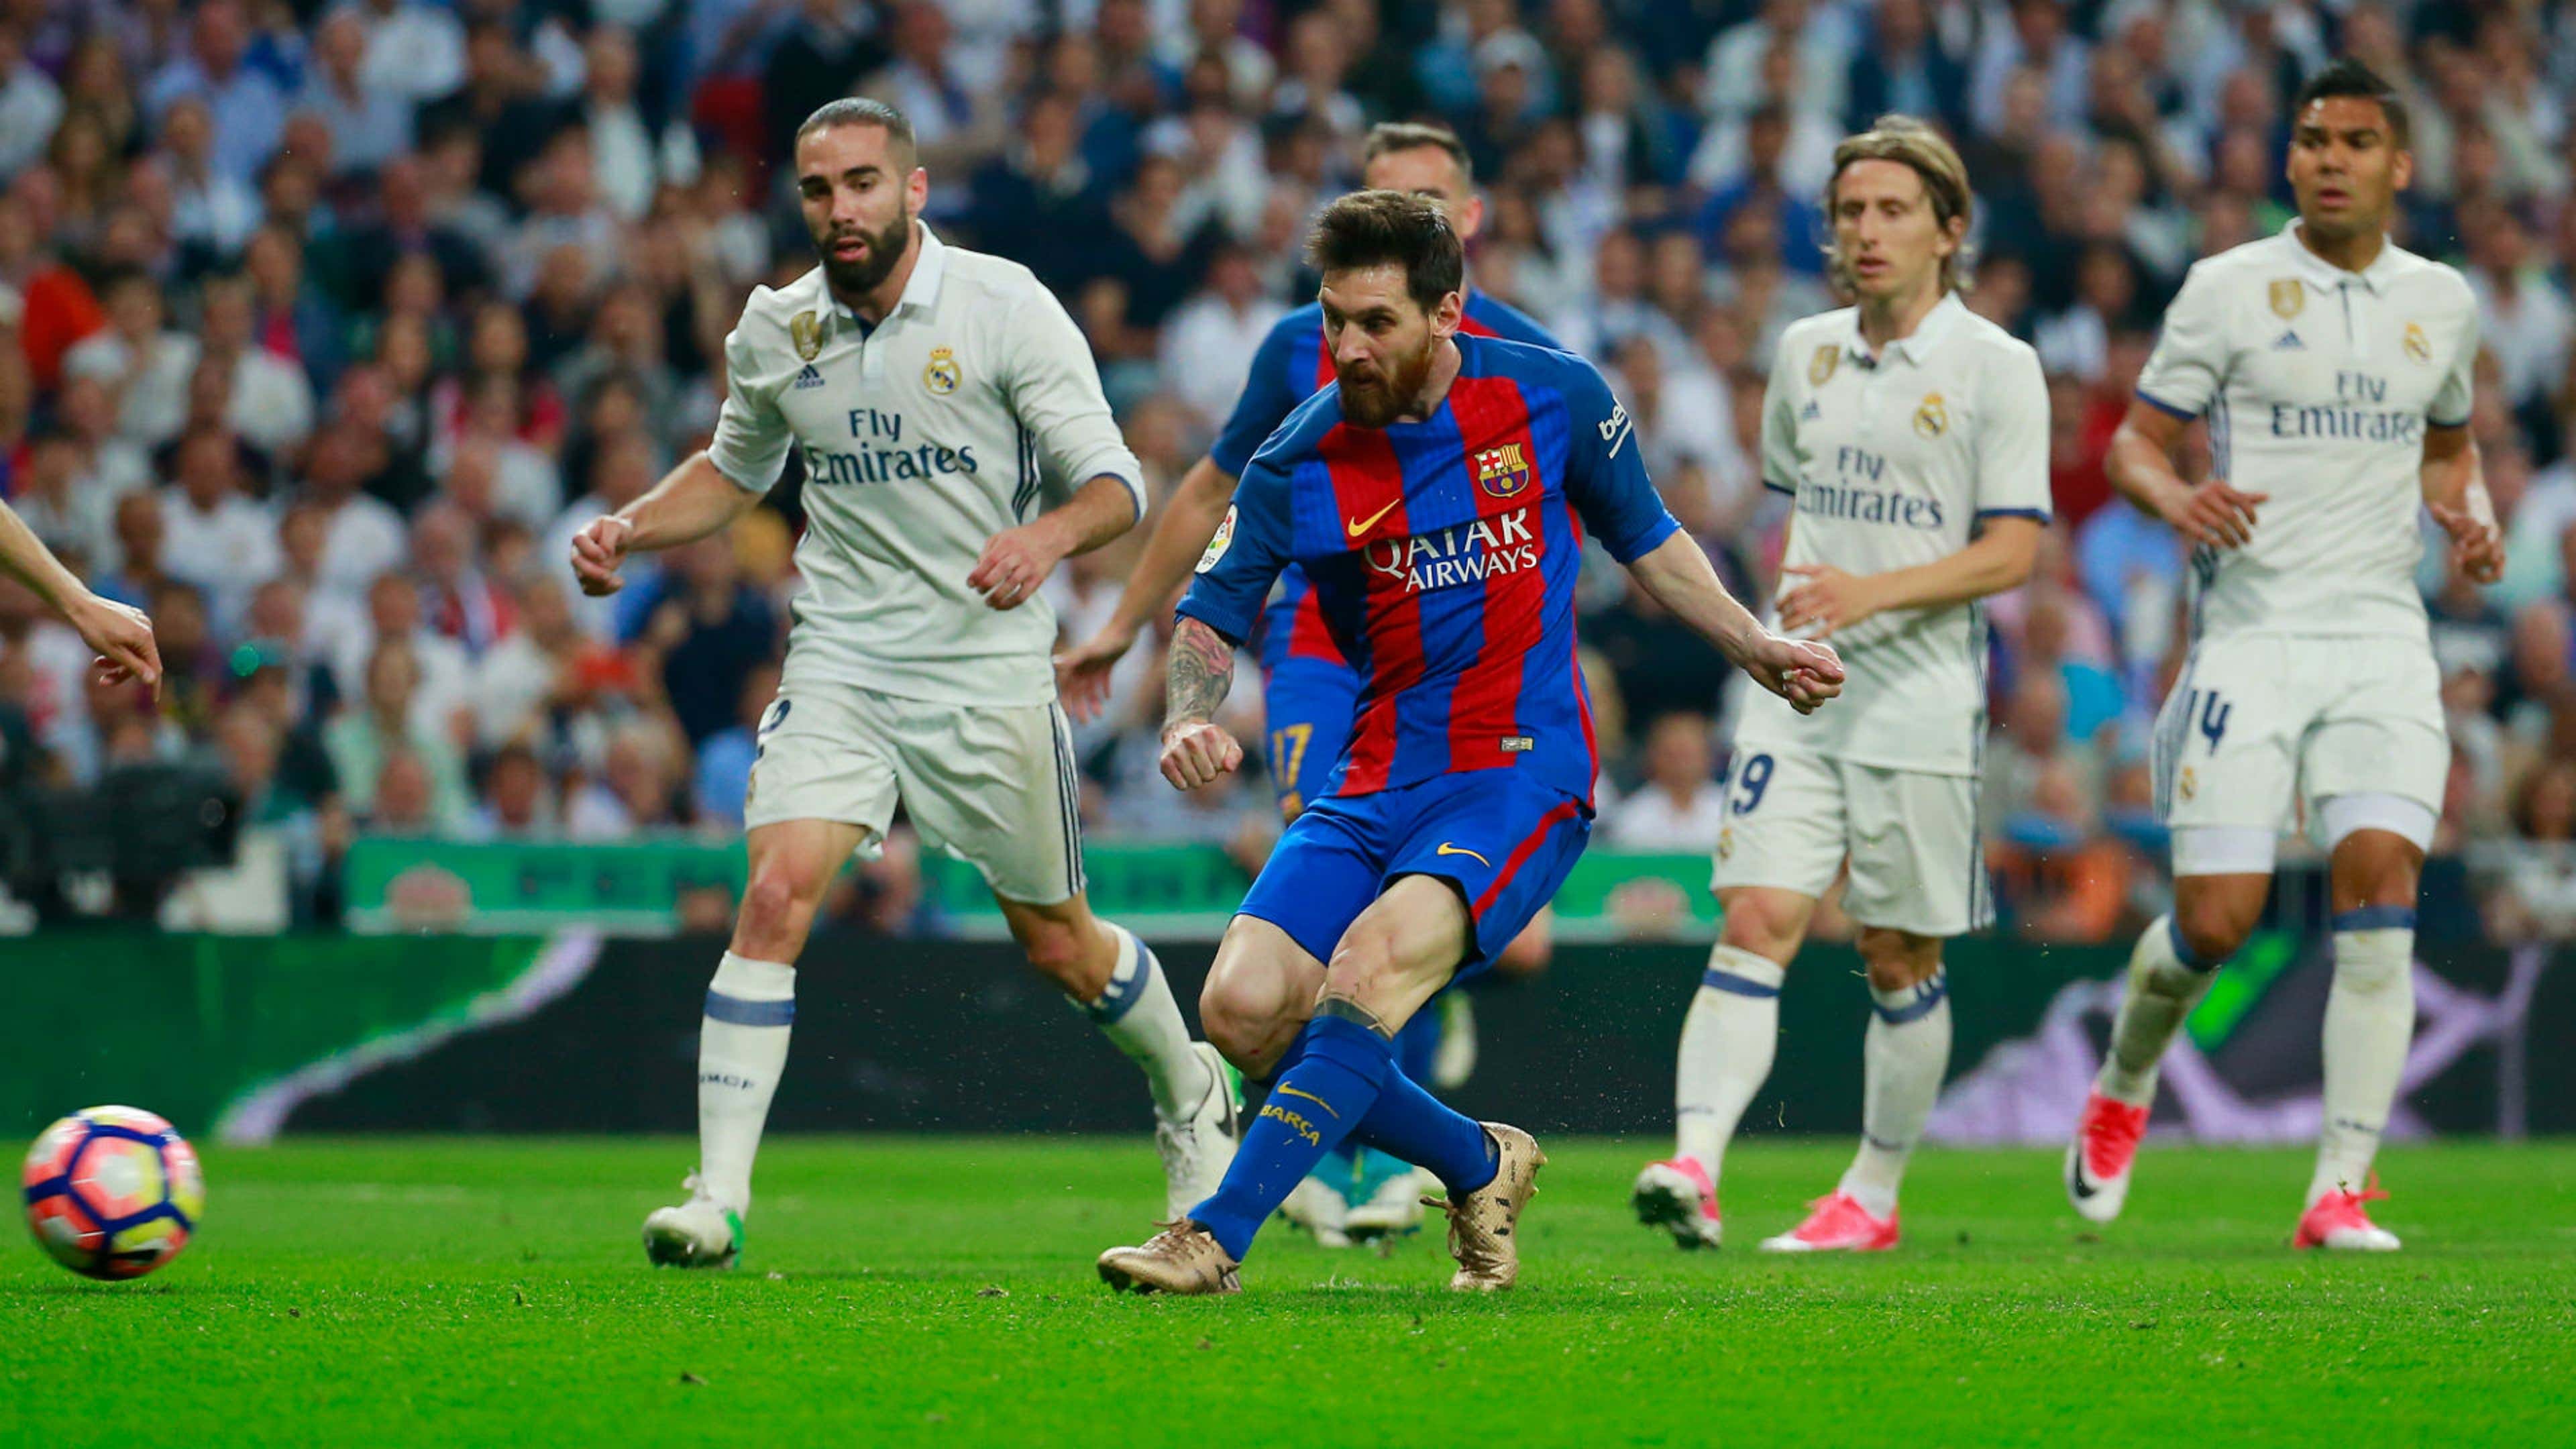 Messi against real madrid